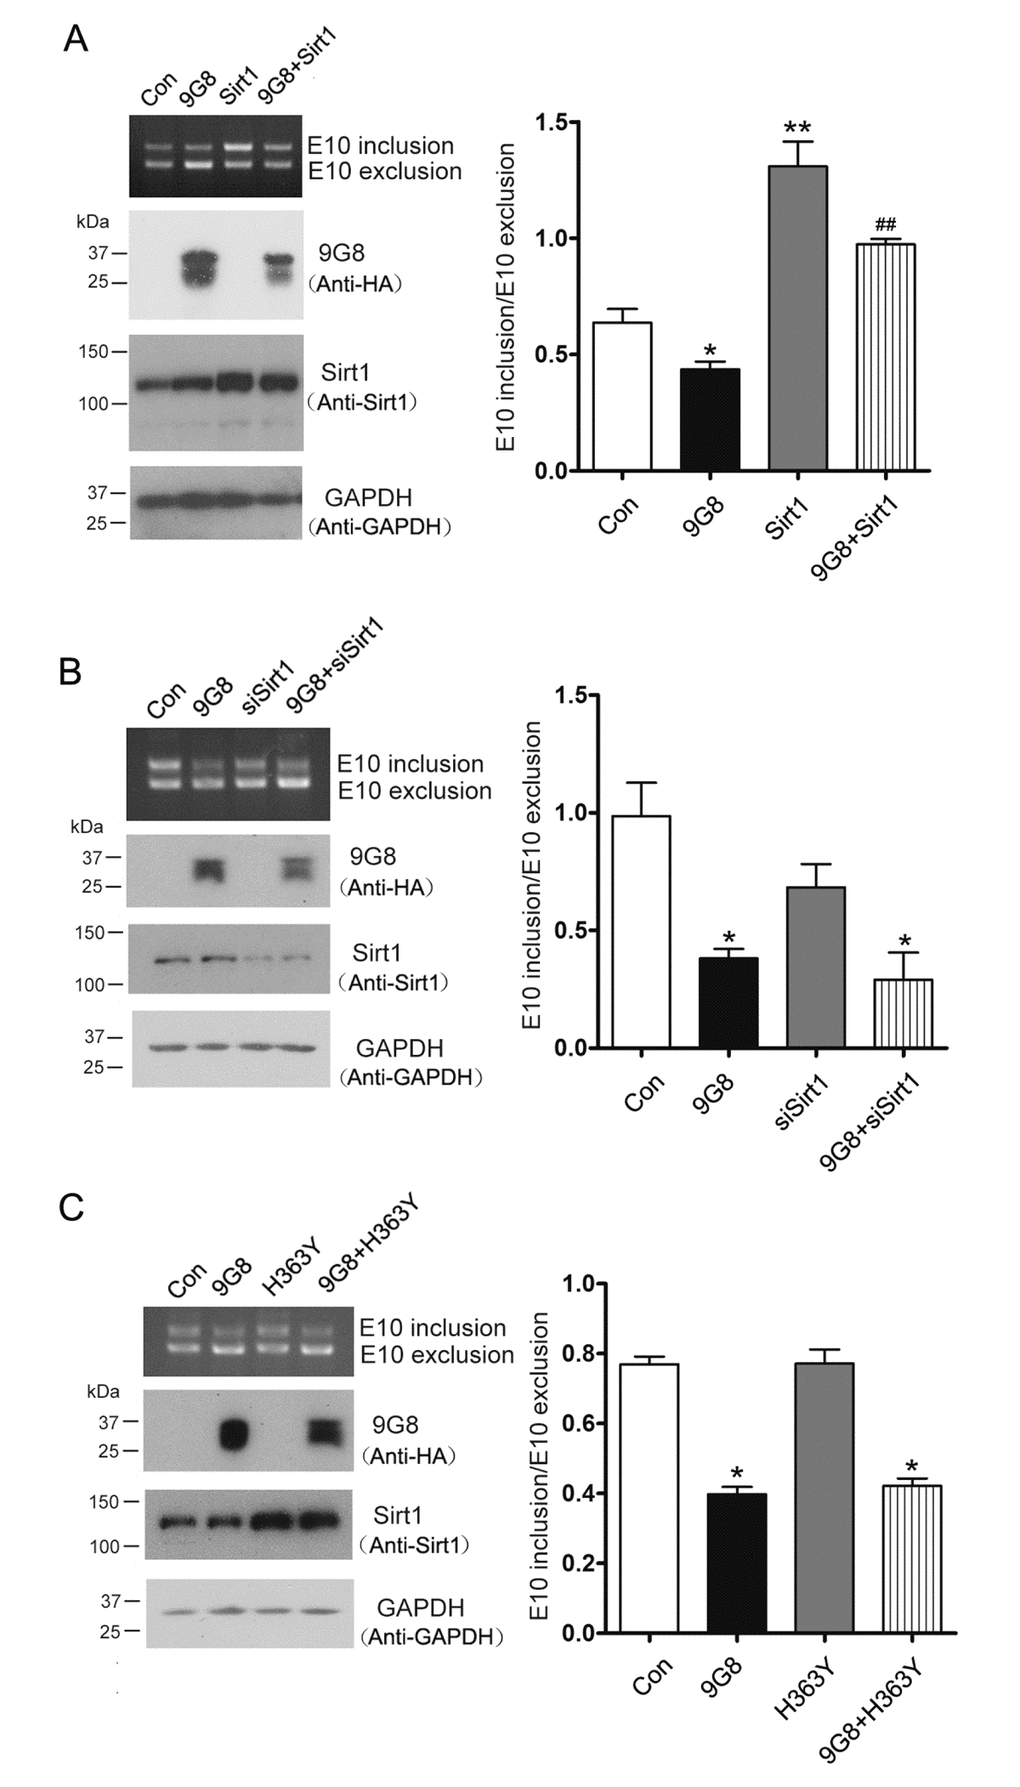 Sirt1 inhibits 9G8-enhanced 3R-tau expression. (A) 9G8 or Sirt1 was overexpressed individually or together into HEK-293T cells transfected with mini-tau gene pCI/SI9-SI10 for 48 h. The splicing products of tau exon 10 were analyzed by RT-PCR. (B) Mini-tau gene was co-transfected into HEK-293T cells with siRNA of Sirt1 only or together with 9G8, and then splicing products were analyzed by RT-PCR 48 h after transfection. (C) pcDNA3.1/SIRT1 or pcDNA/3.1H363Y was transfected only or together with 9G8 into HEK-293T cells. Splicing products were analyzed by RT-PCR after 48 h transfection. The ratios of tau exon 10 inclusion to exclusion are presented as mean ± S.D. and analyzed with two-way ANOVA. *, p ## p 